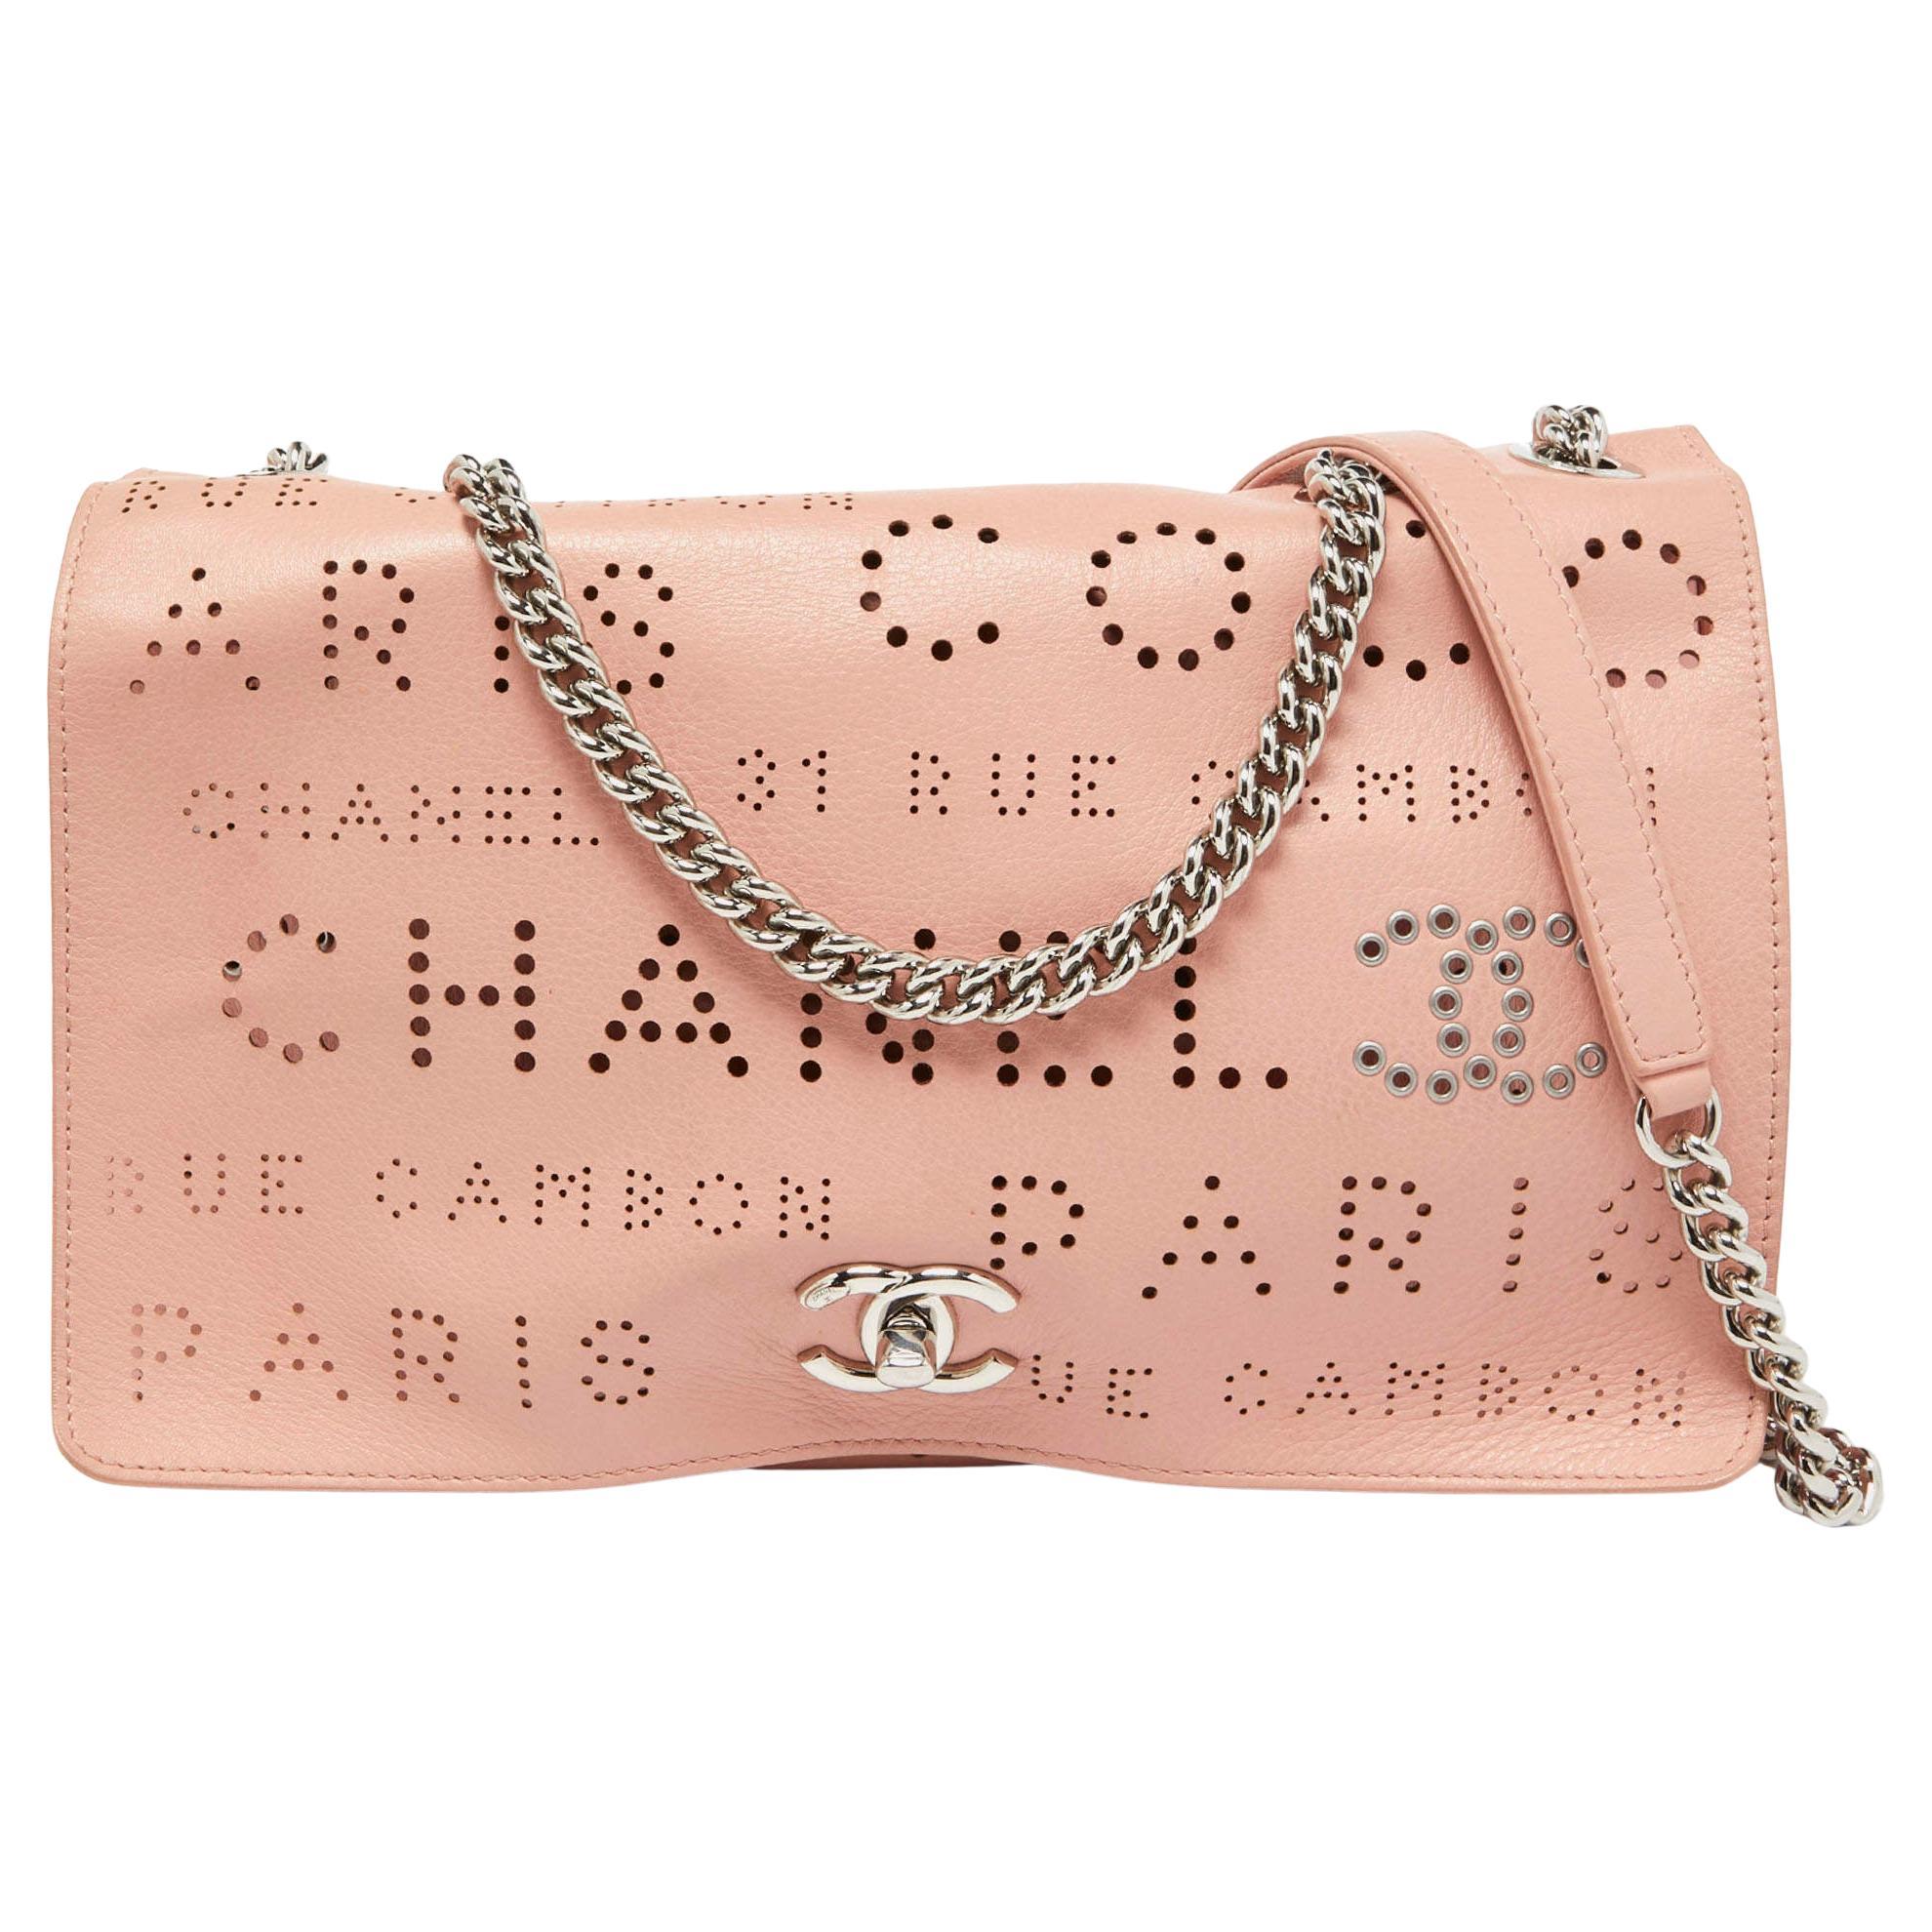 Chanel Light Pink Leather Perforated Logo Flap Bag